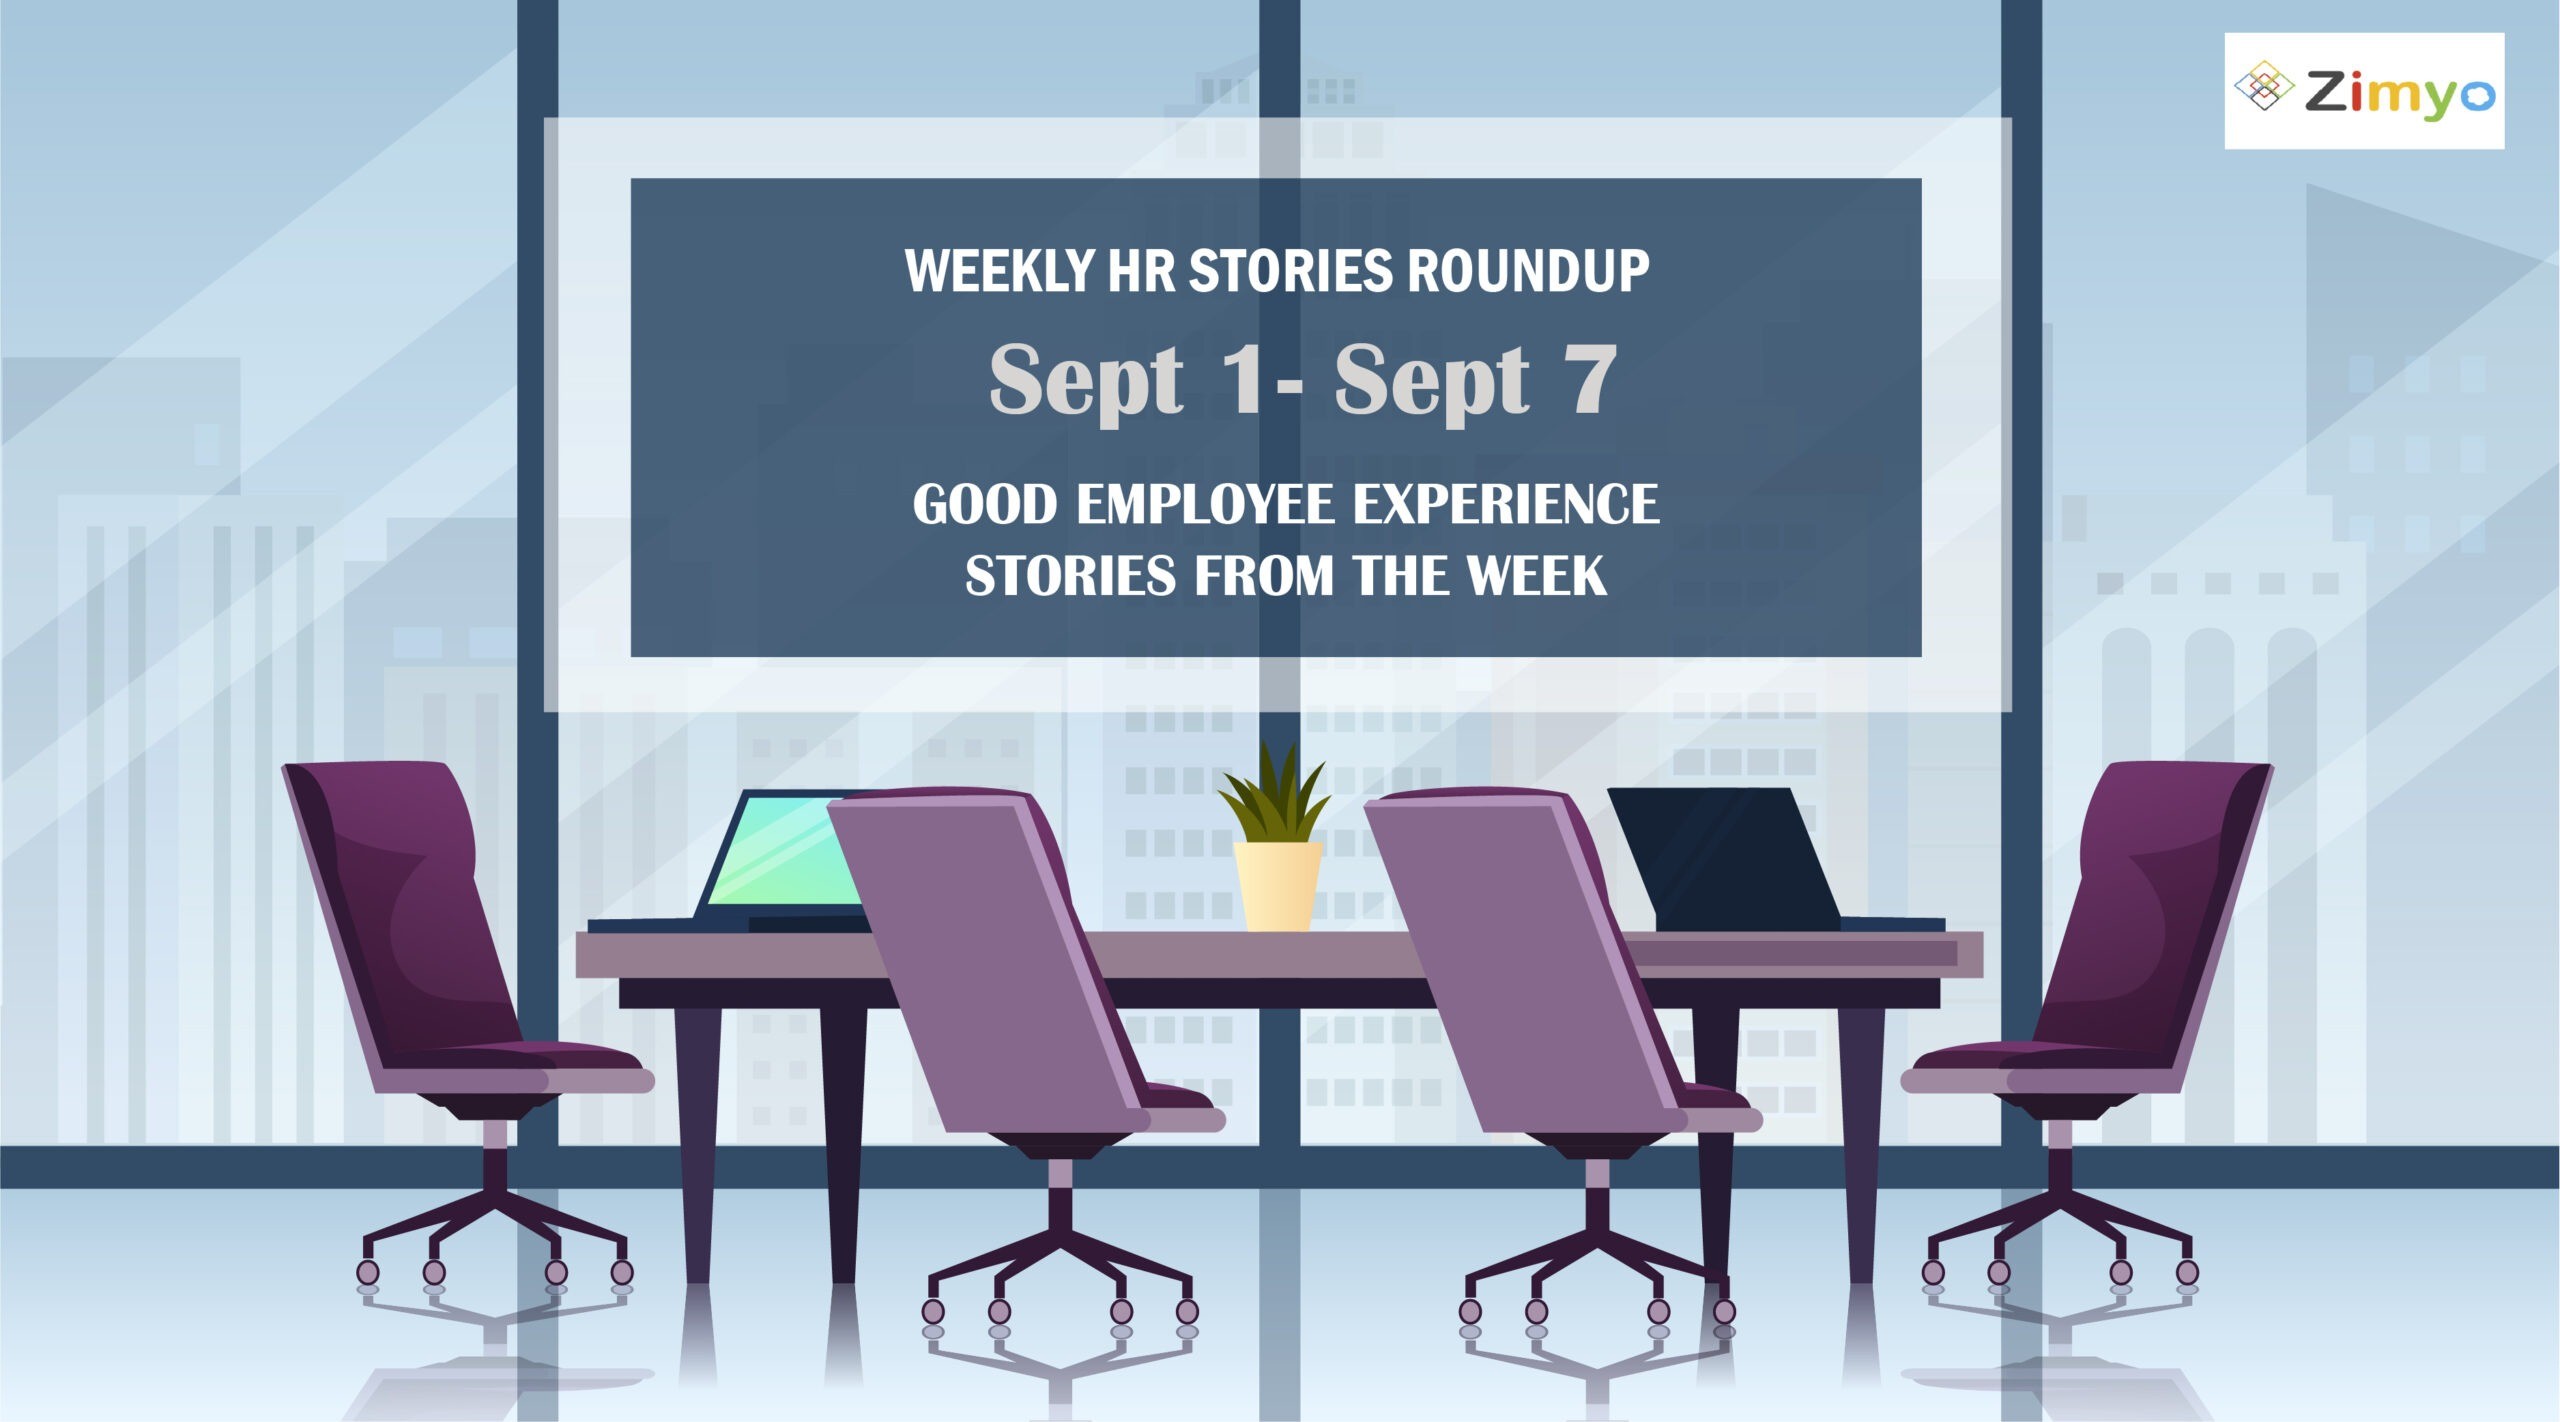 Good Employee Experience Story [Sept 1 - Sept 7]